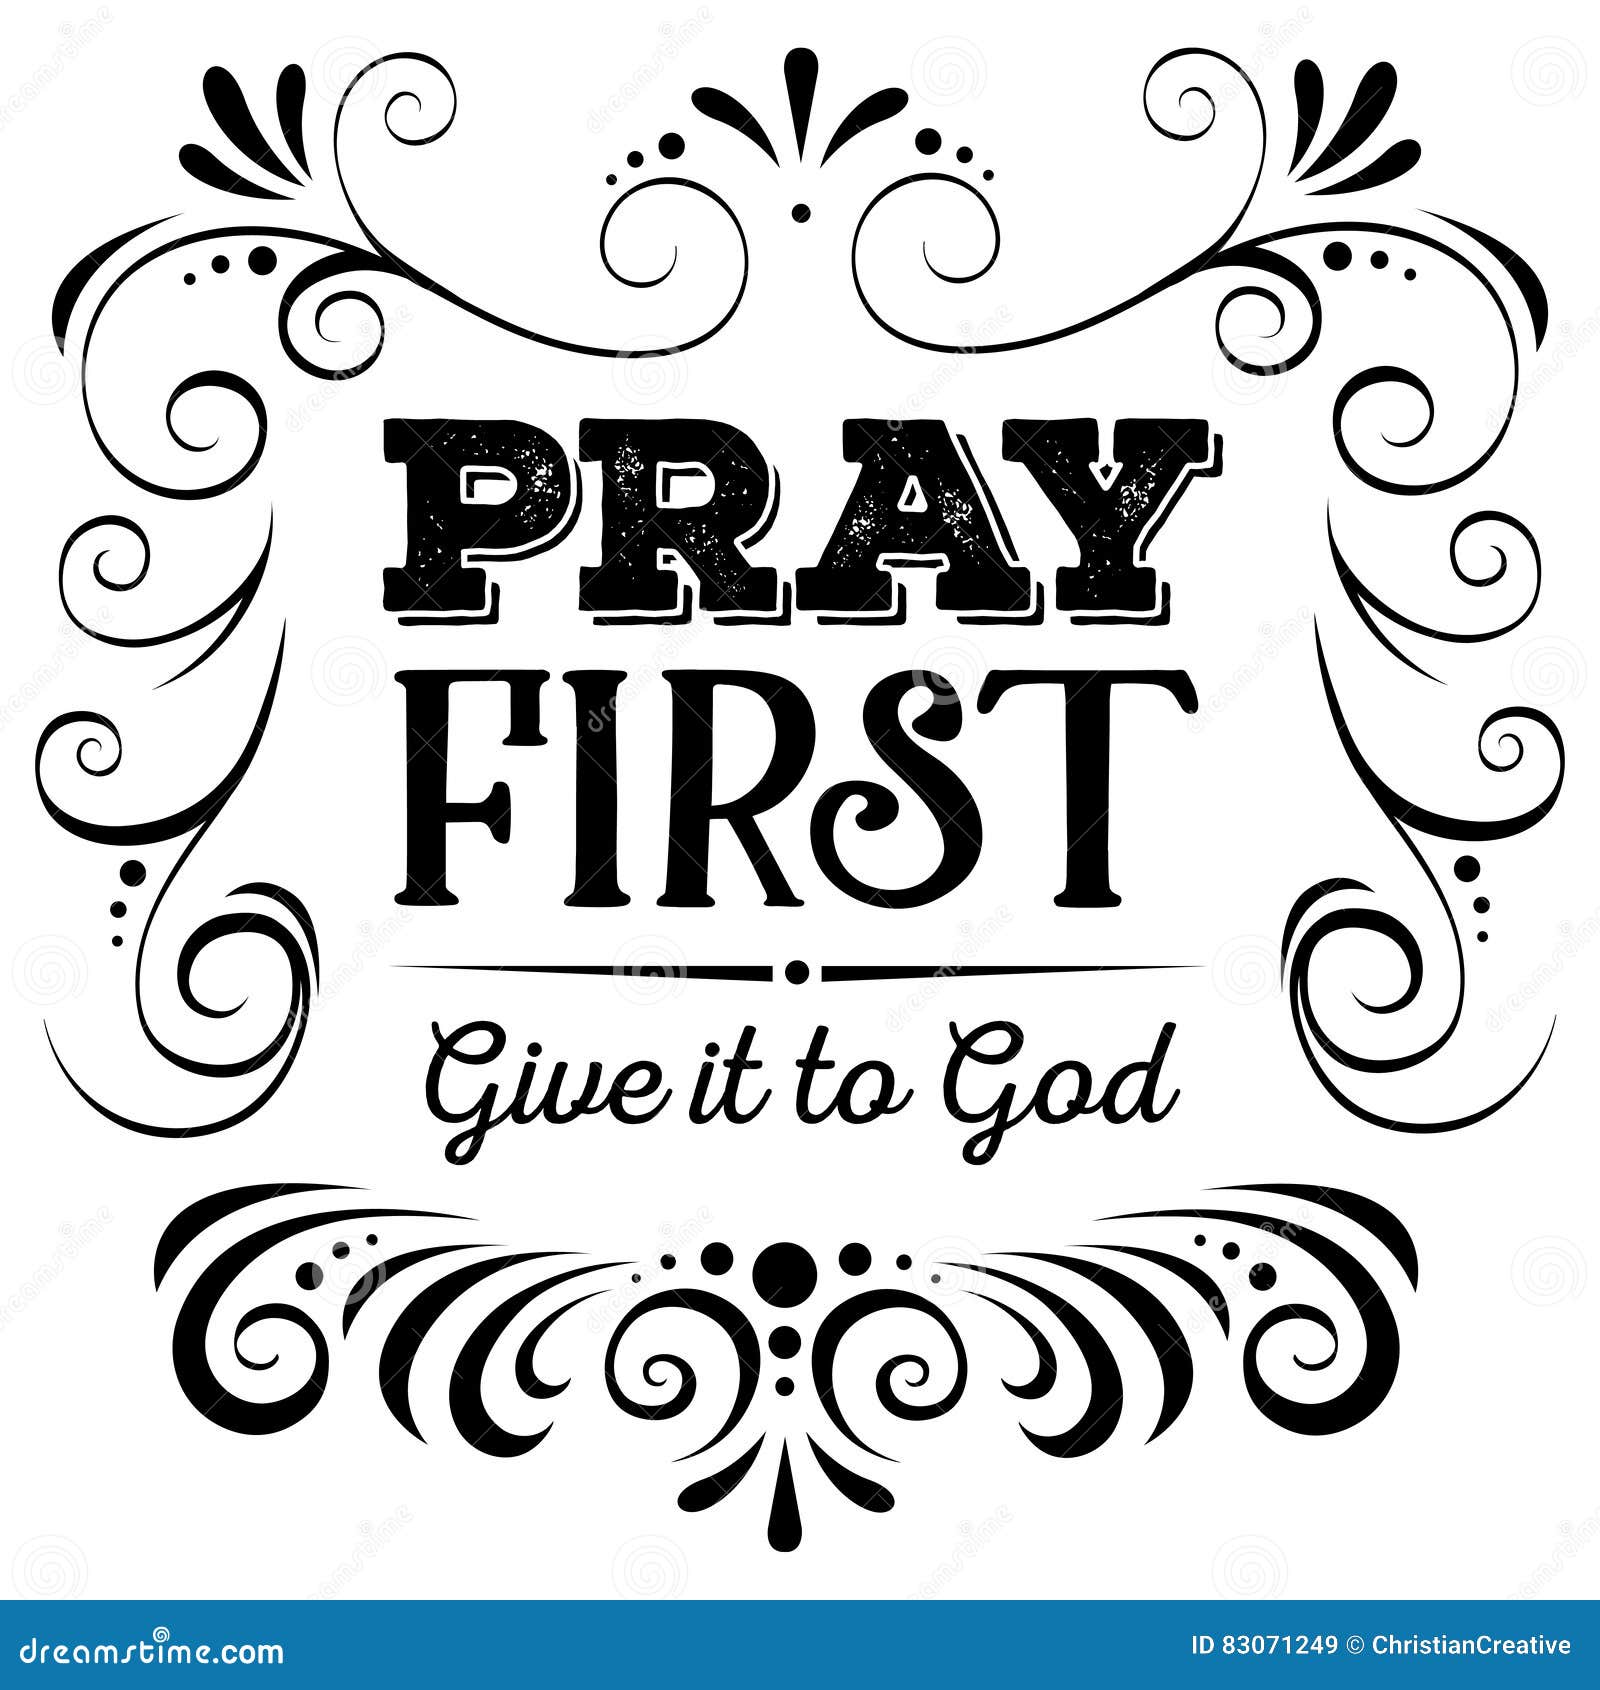 pray first give it to god black on white background